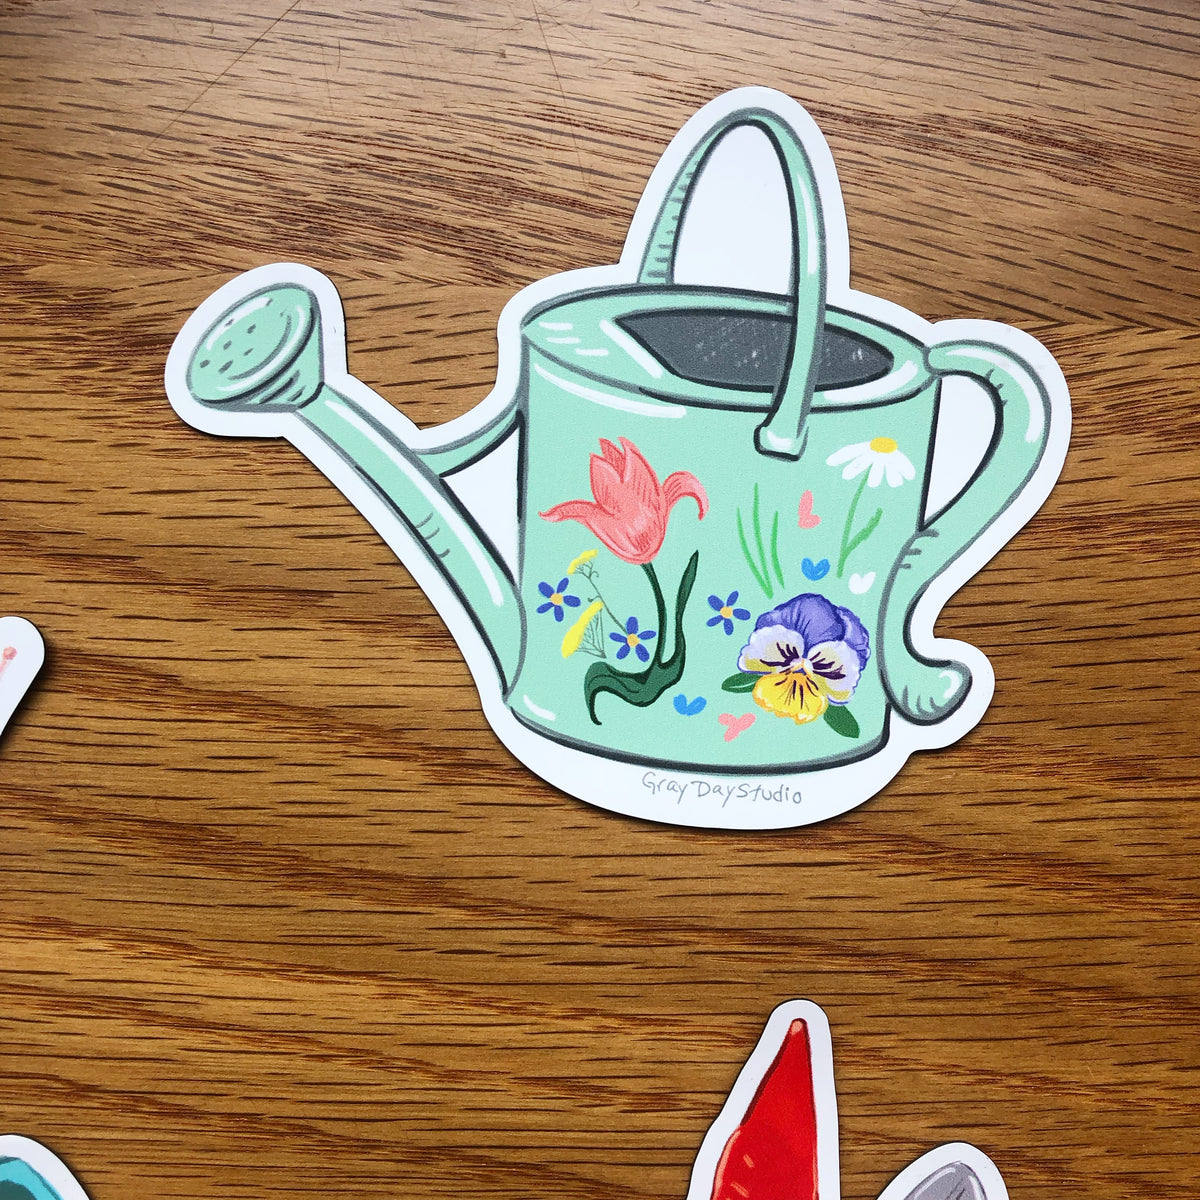 watering can magnet by Gray Day Studio